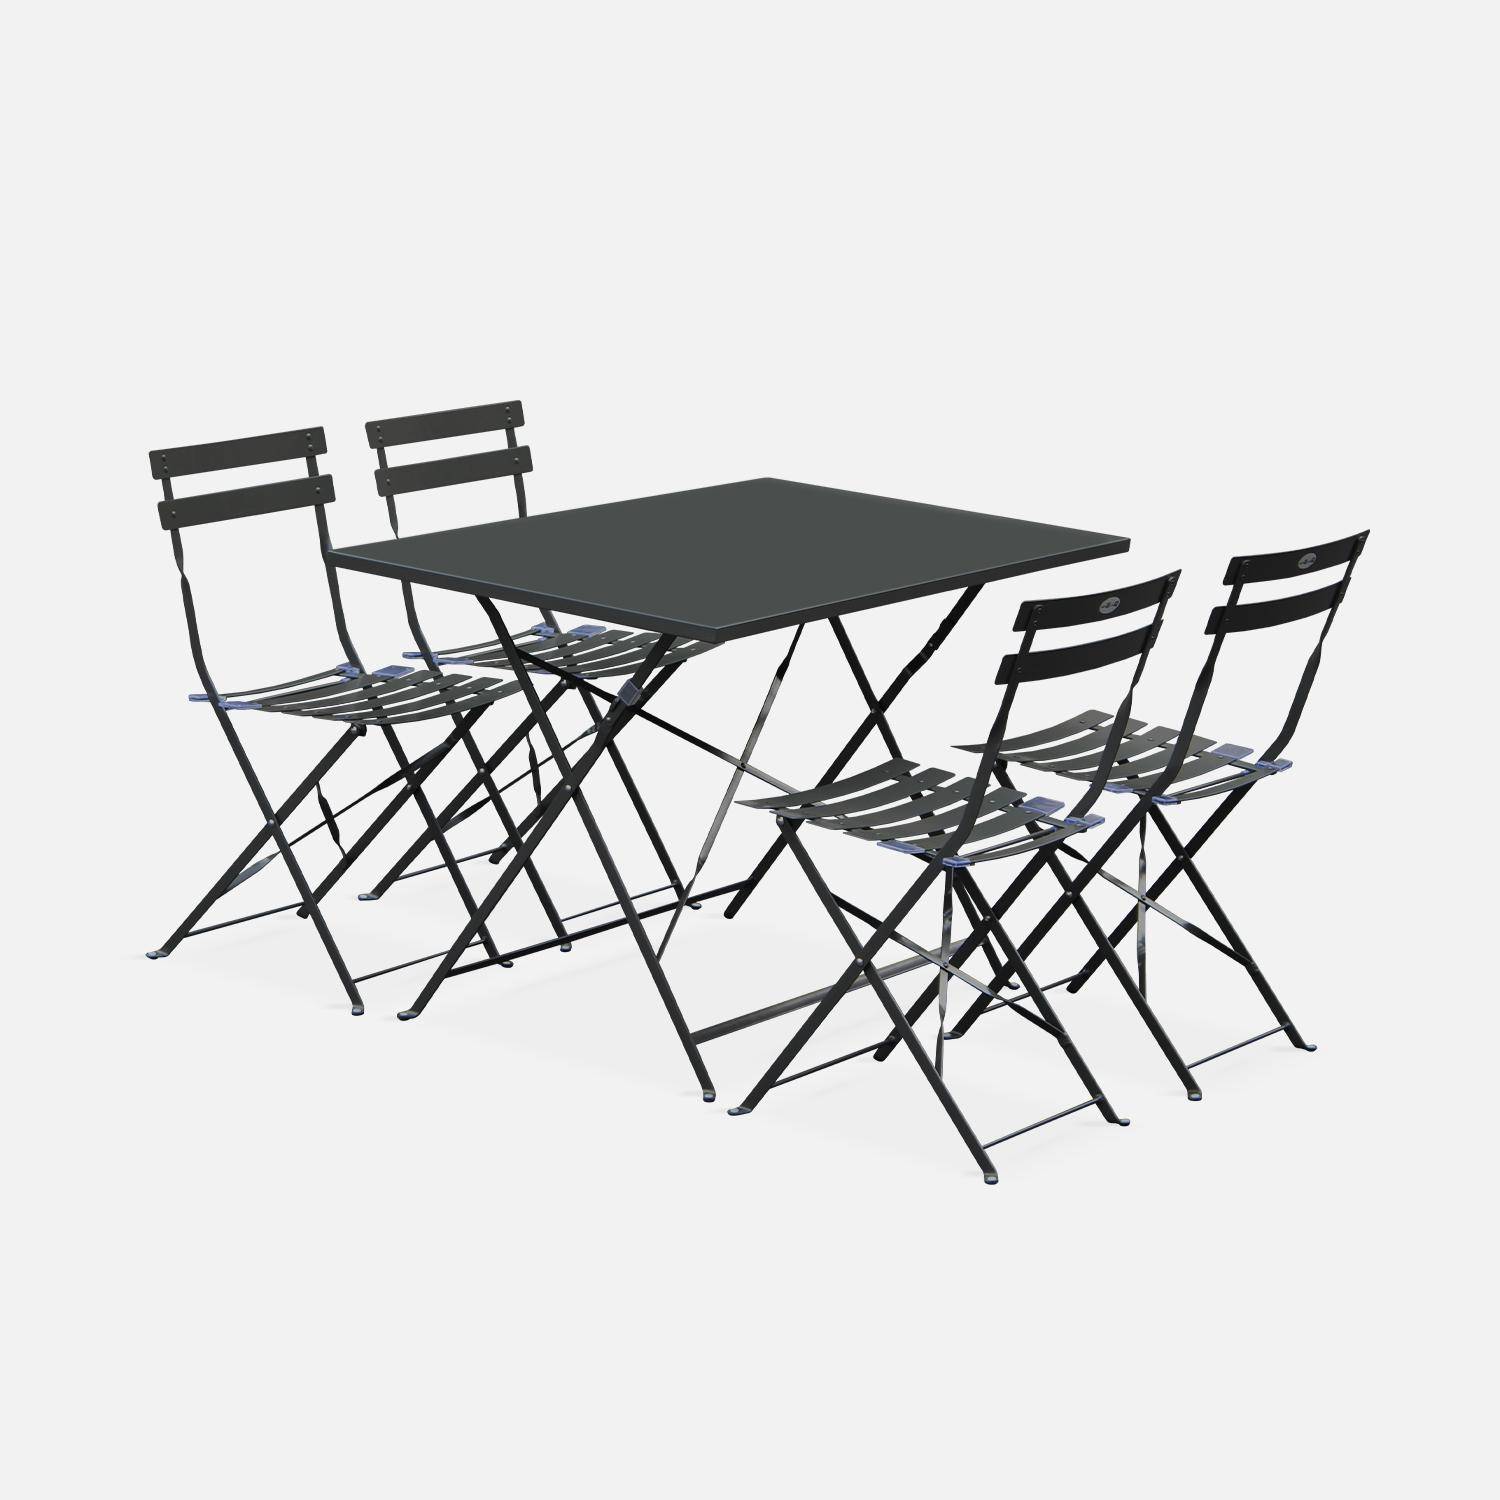 4-seater foldable thermo-lacquered steel bistro garden table with chairs, 110x70cm - Emilia - Anthracite,sweeek,Photo2